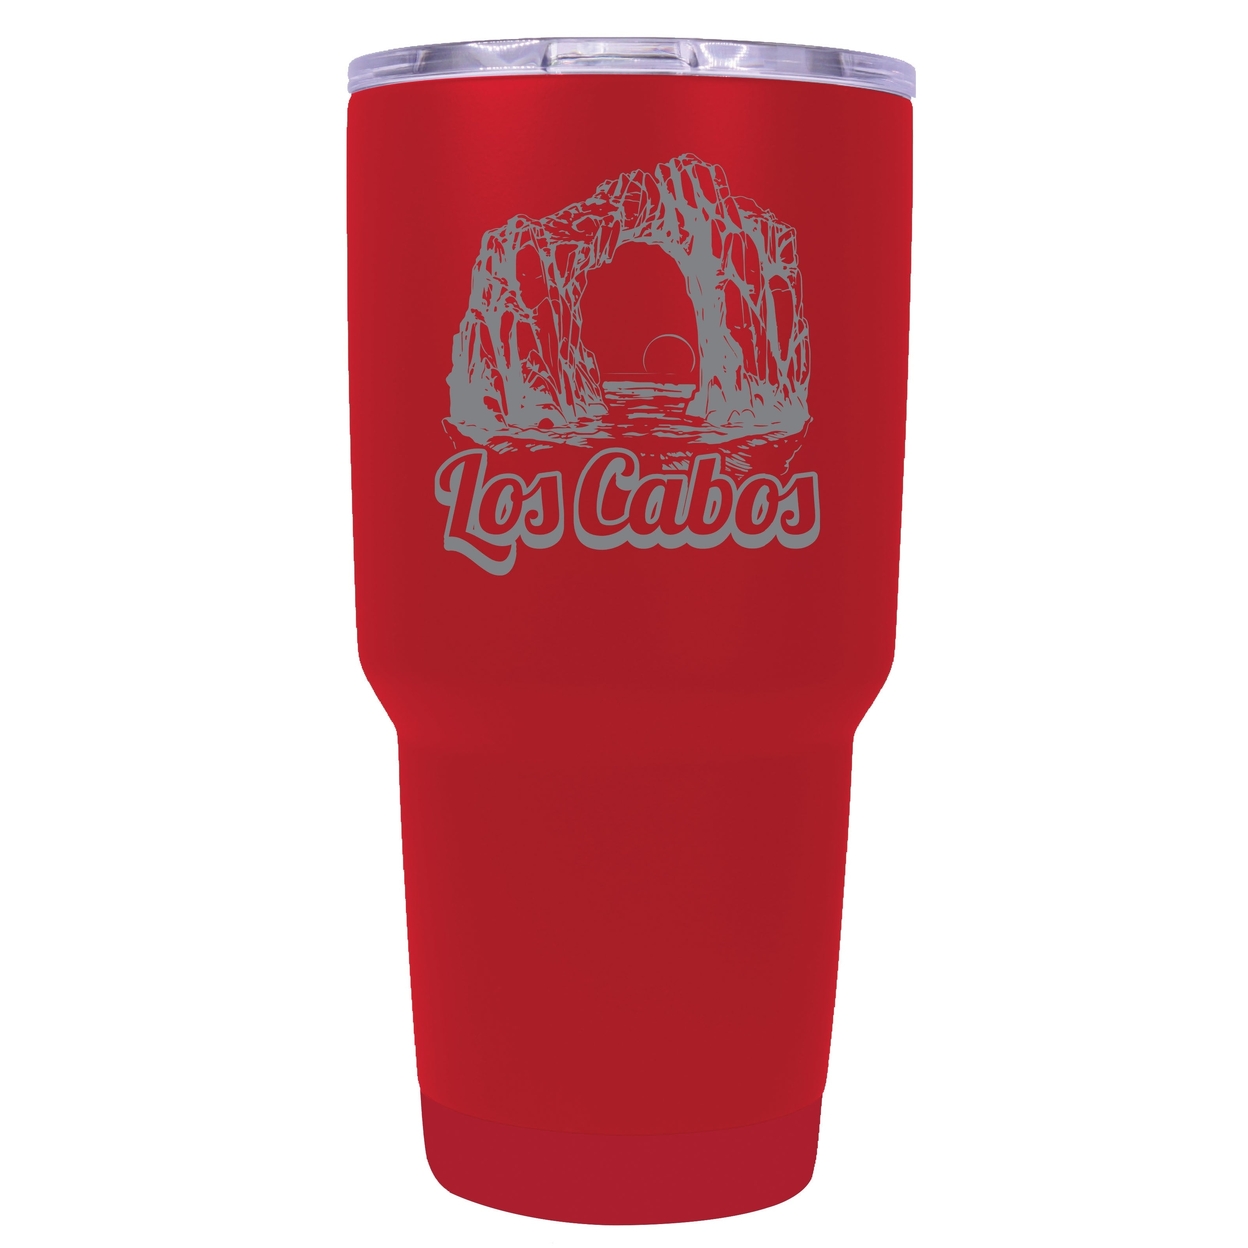 Los Cabos Mexico Souvenir 24 Oz Engraved Insulated Stainless Steel Tumbler - Navy,,2-Pack